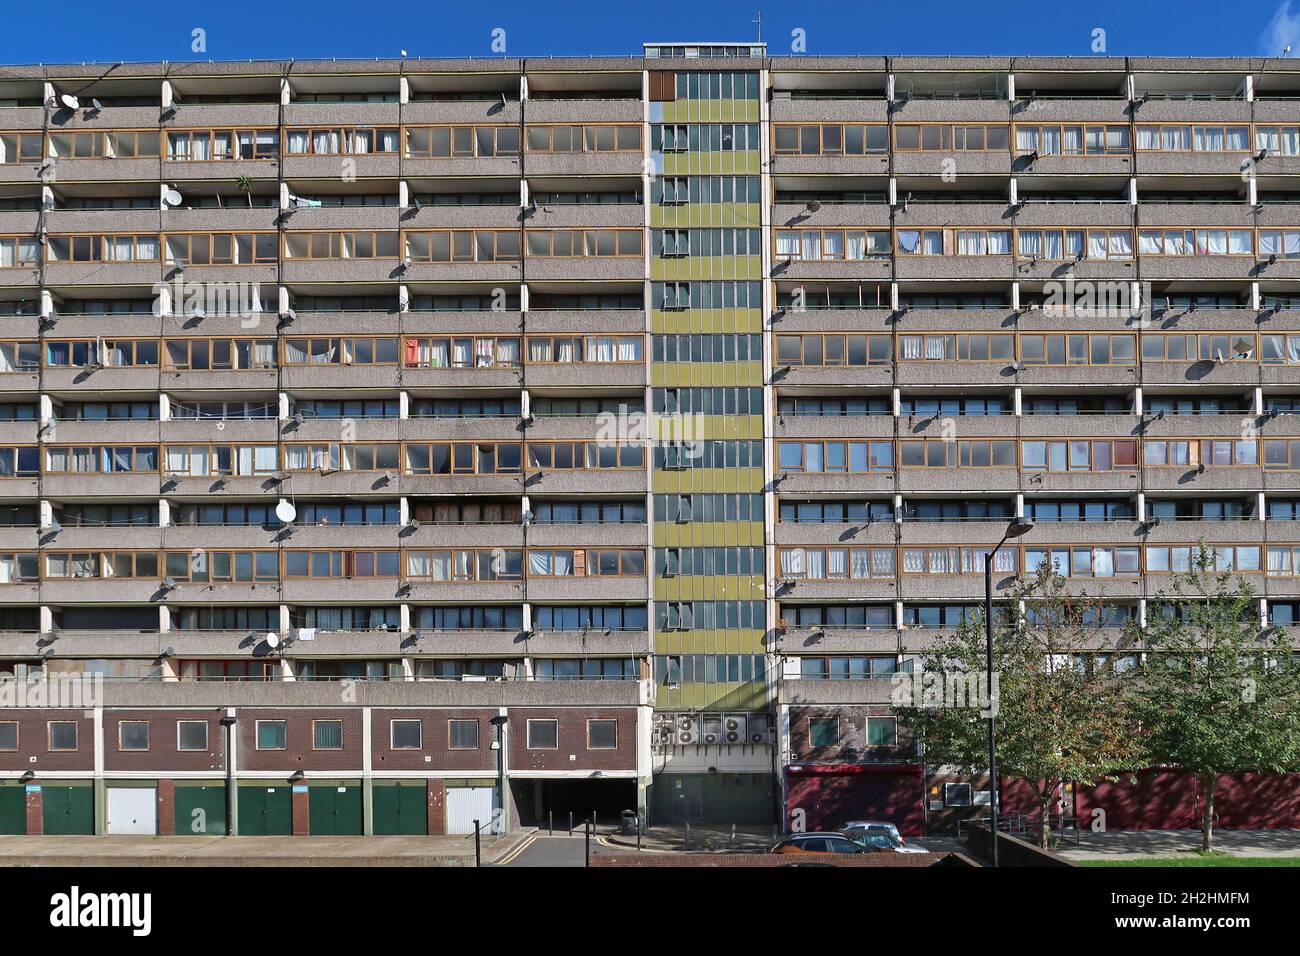 Wendover House, Aylesbury Estate, London, UK. One of the largest and most notorious 1960's public housing developments.  Now being redeveloped. Stock Photo